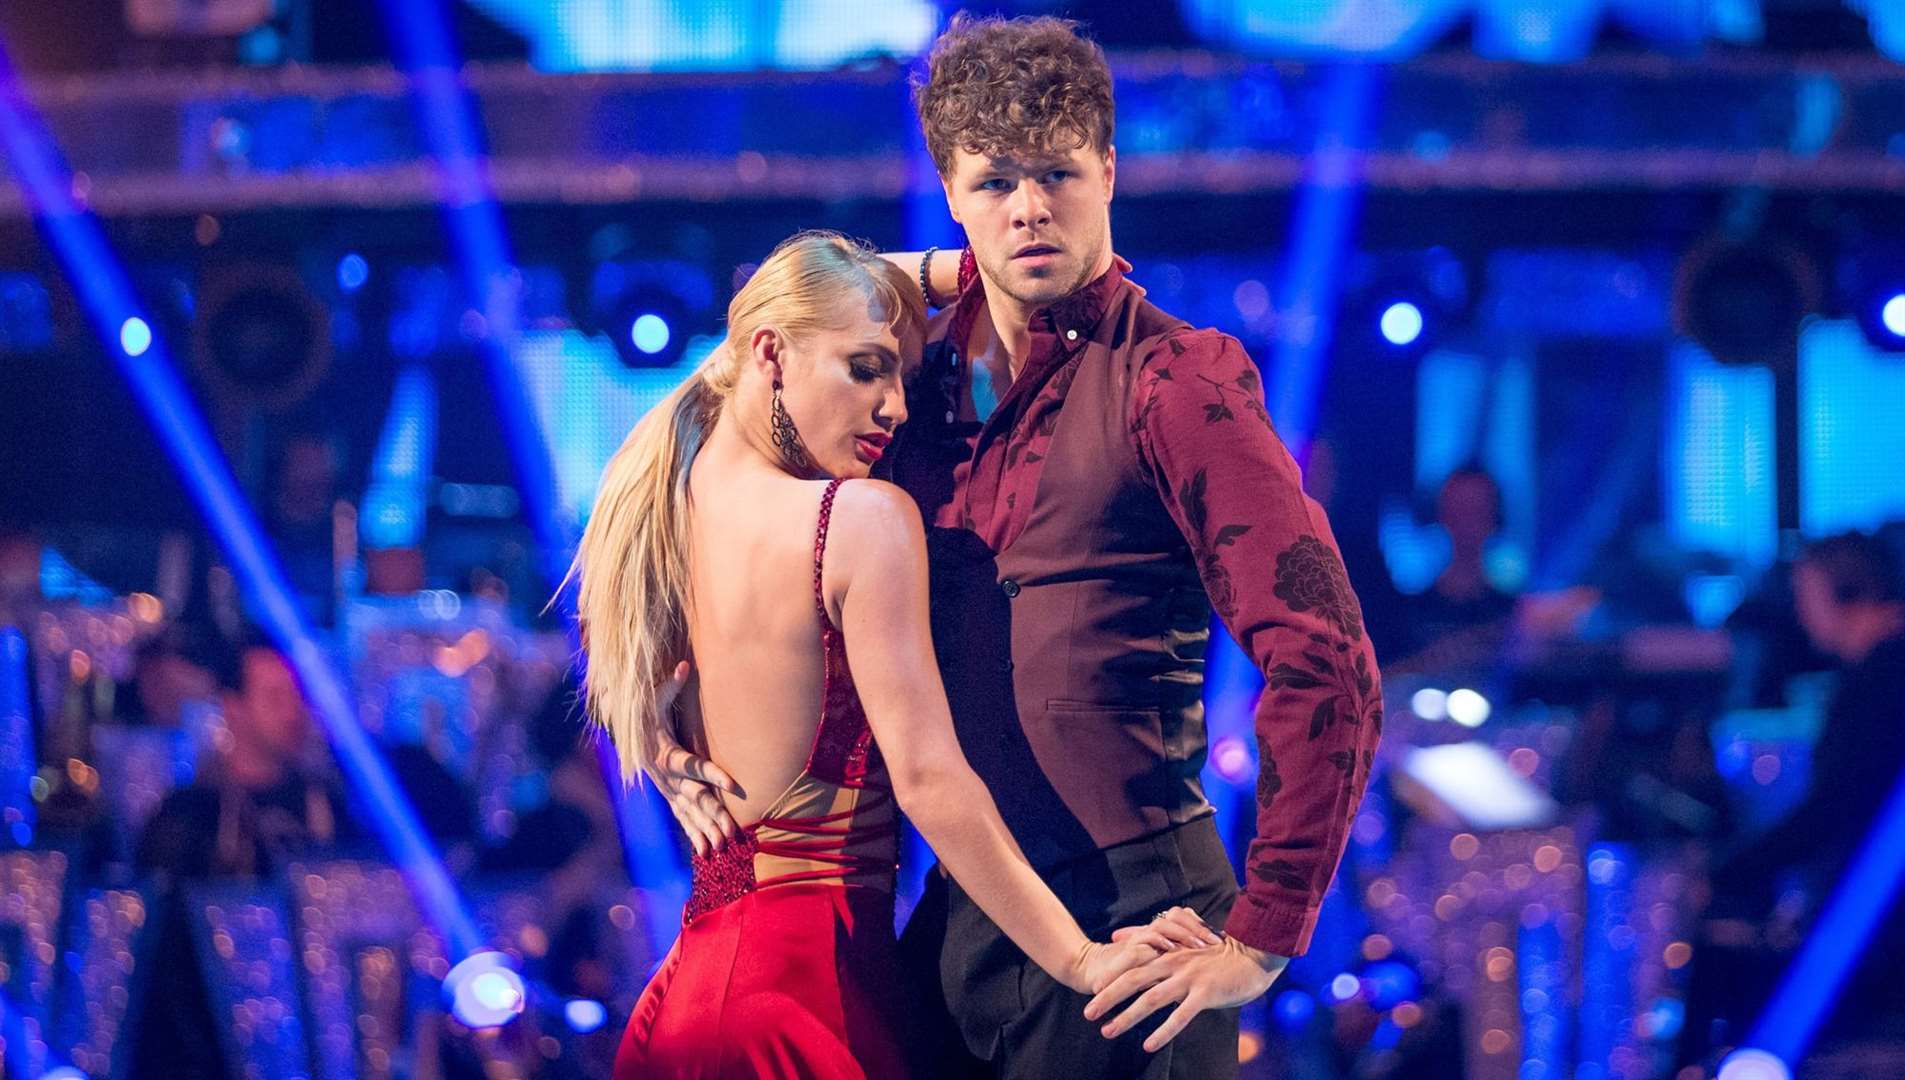 Strictly winner Jay McGuiness dancing with partner Aliona Vilani. Picture: BBC - Guy Levy